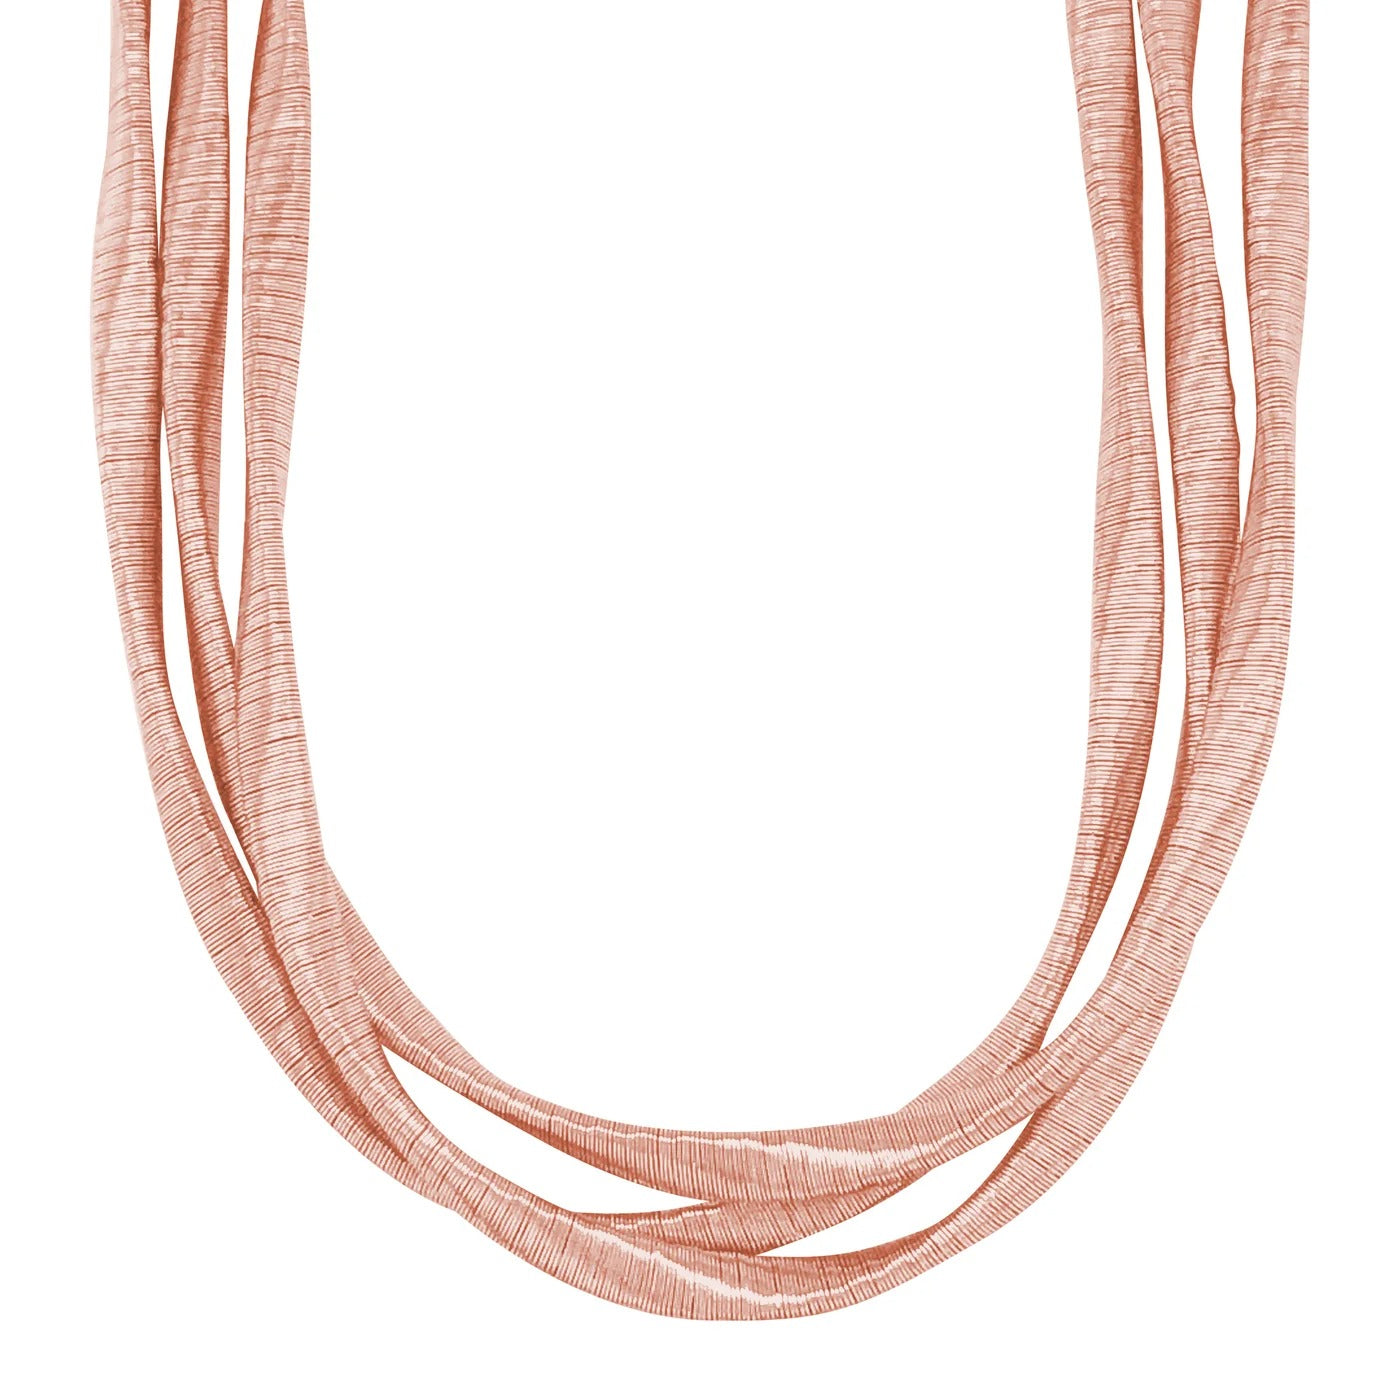 A layered cable sterling silver women's necklace displayed on a neutral white background.